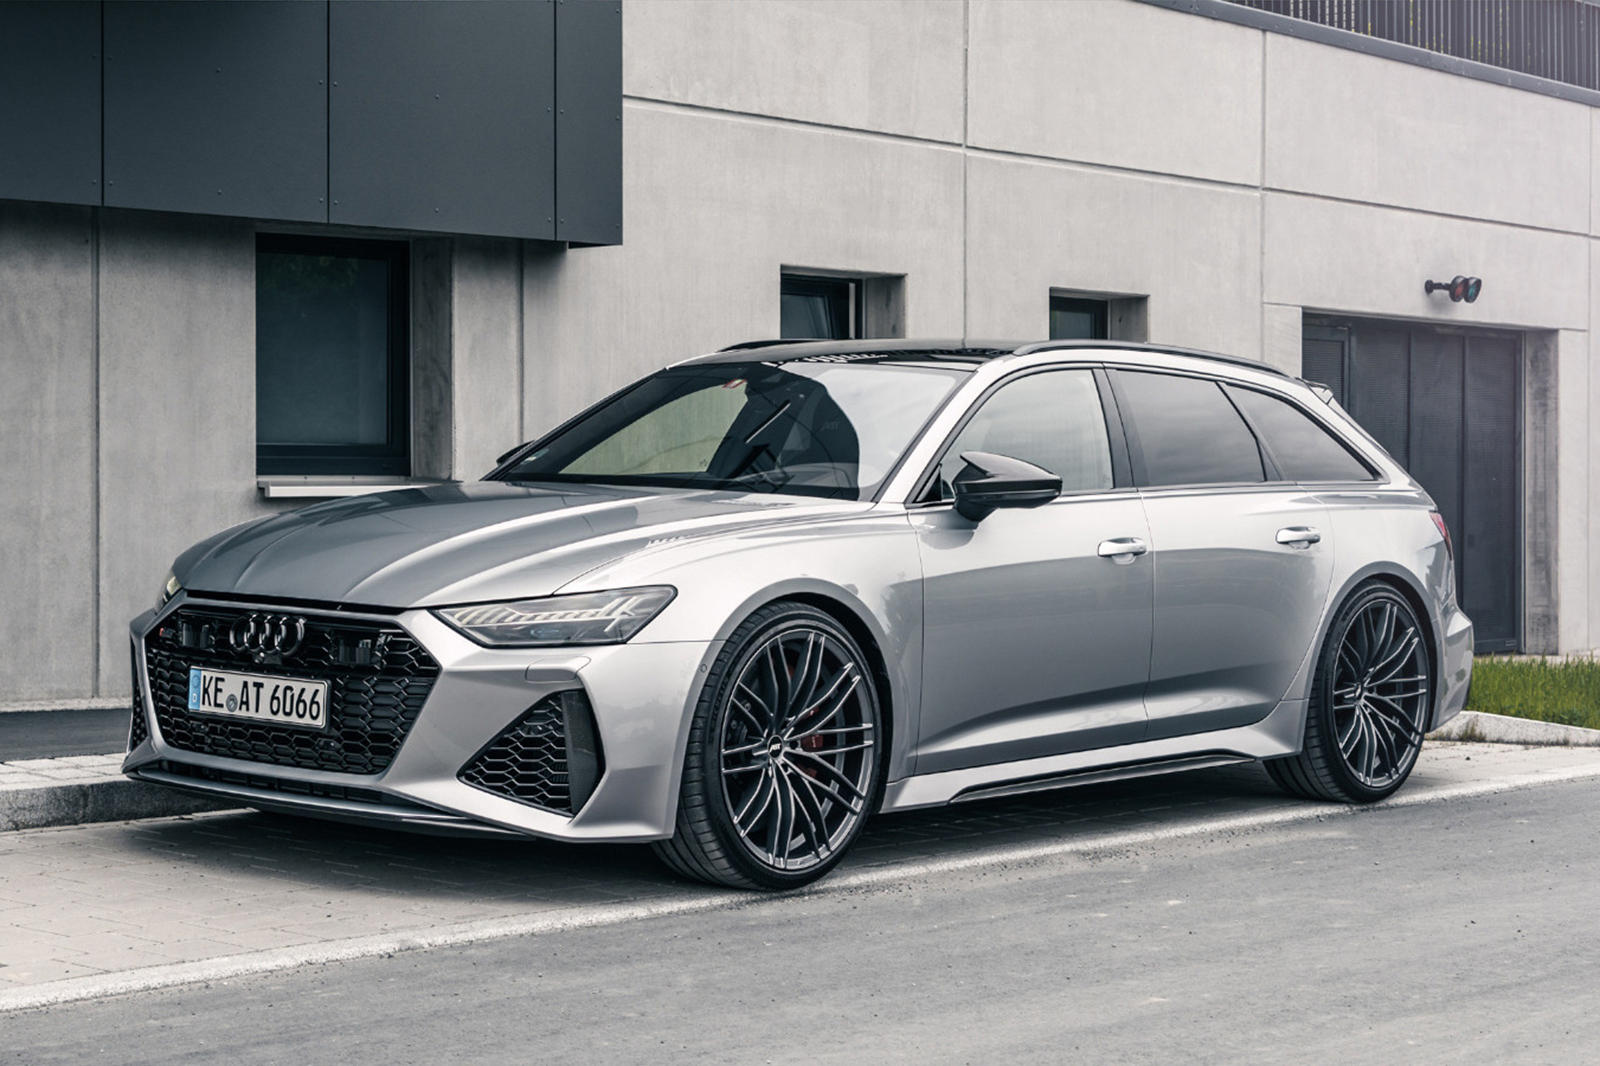 NEW Audi RS6 Performance: The Most Powerful RS6 Yet!